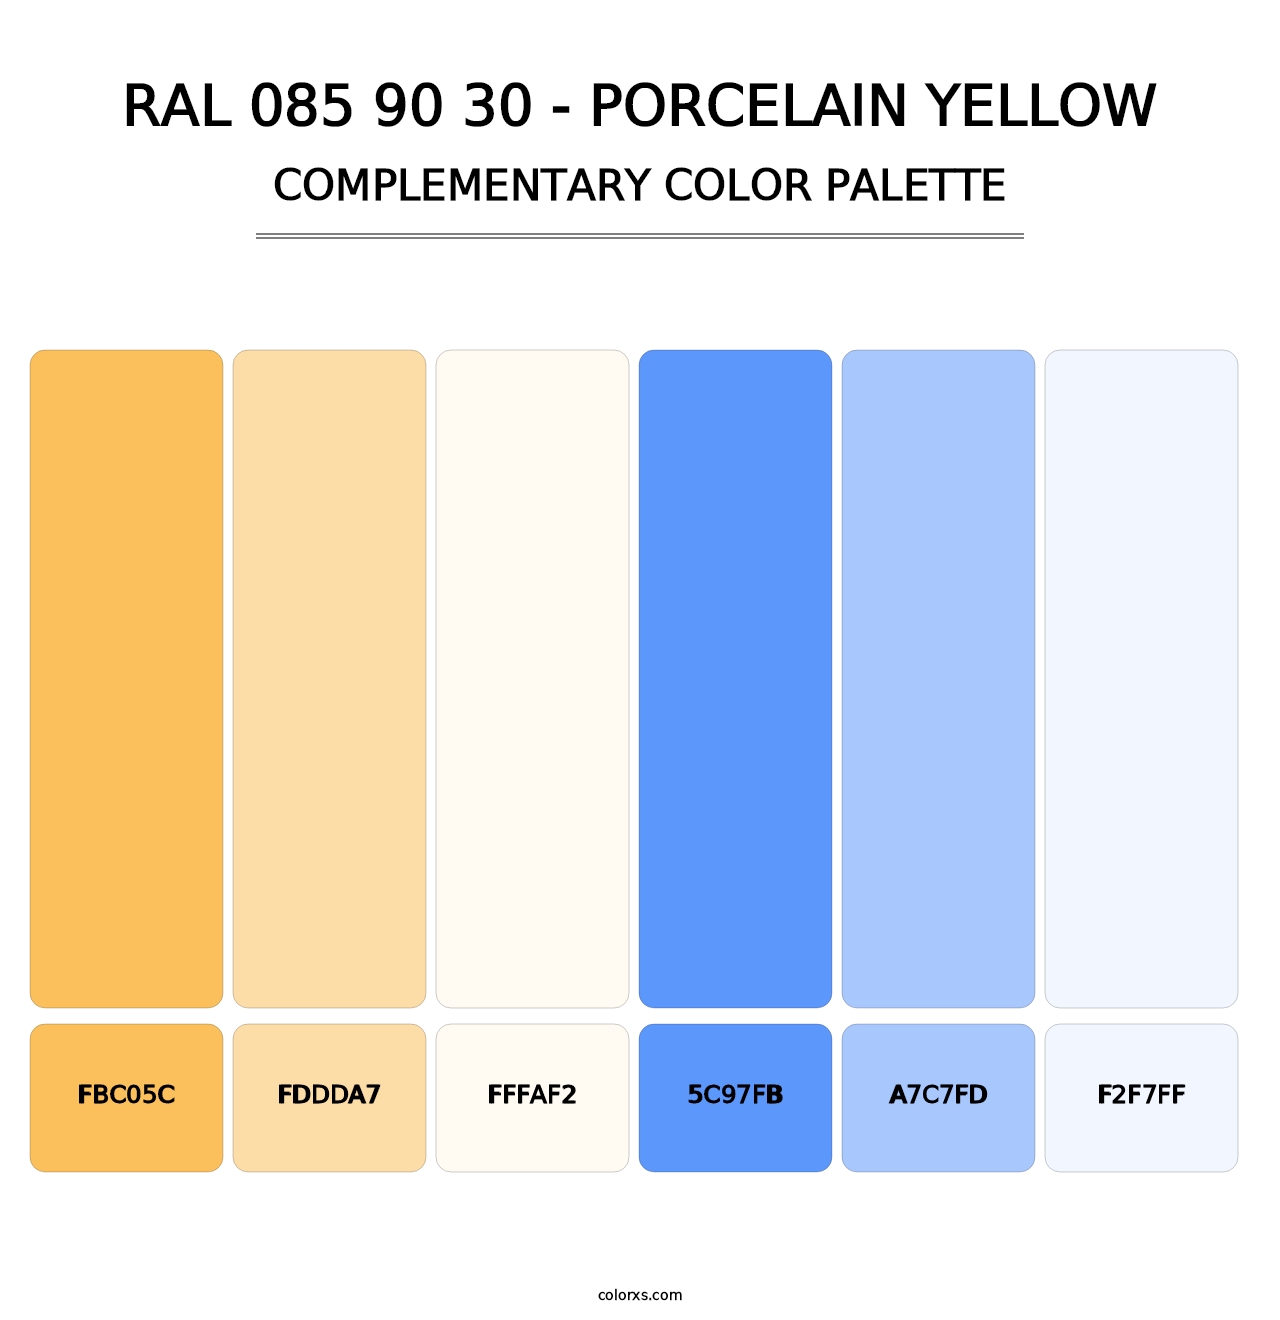 RAL 085 90 30 - Porcelain Yellow - Complementary Color Palette